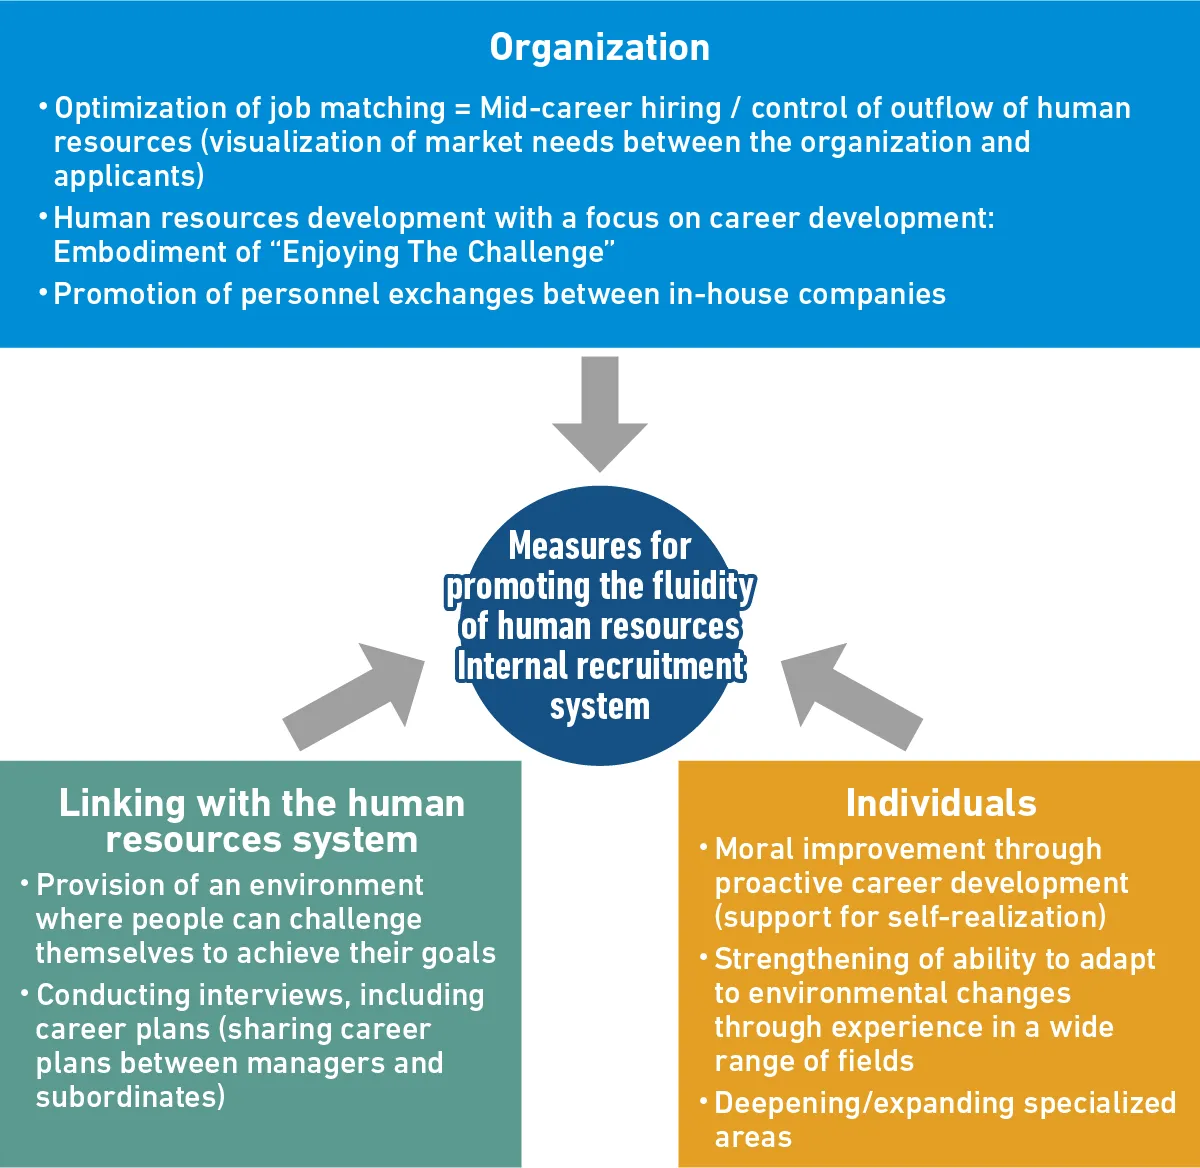 Image of "Internal Recruitment System" as a Measure for Promoting the Fluidity Human Resources